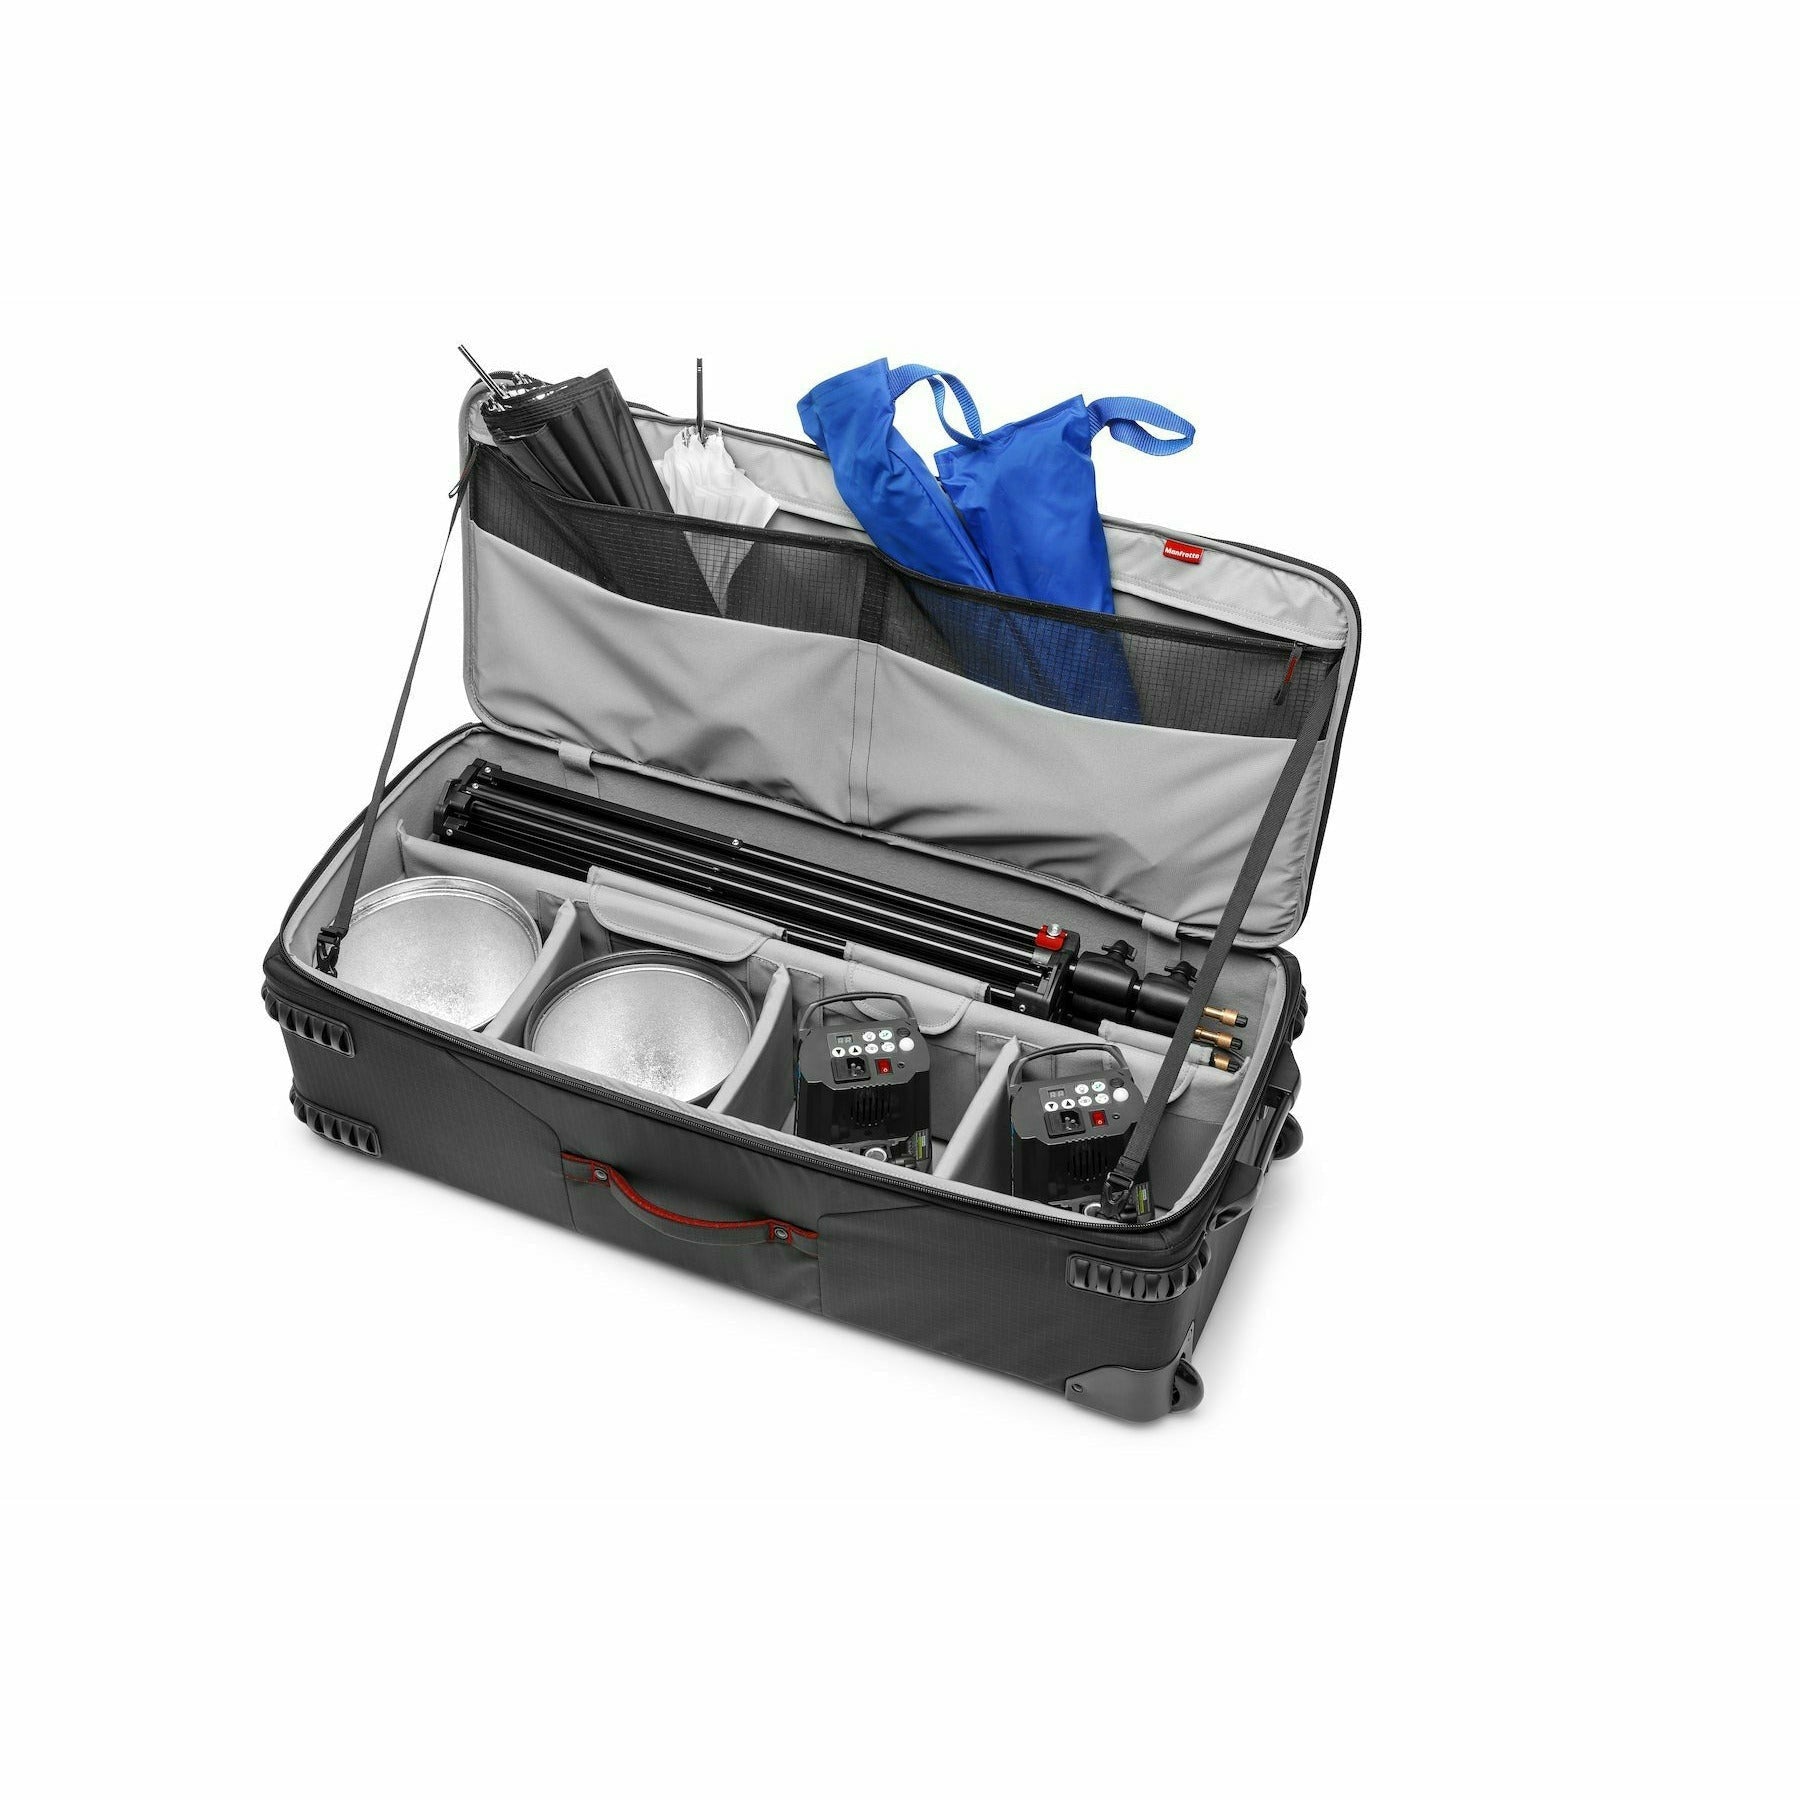 Manfrotto Case Rolling Organizer LW-97W V2 - Dragon Image